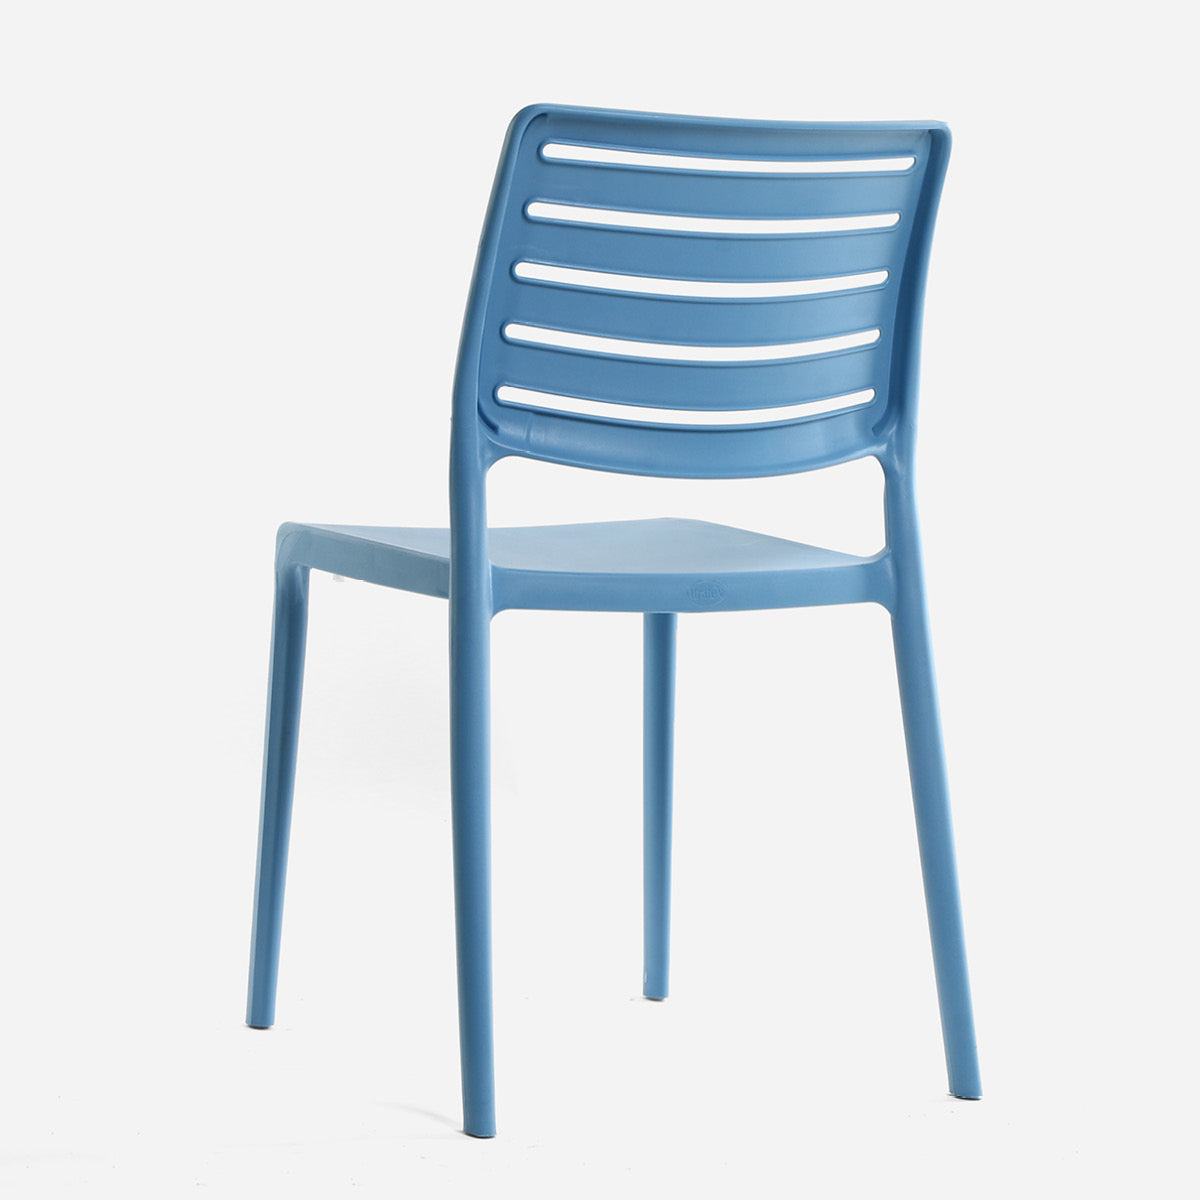 Uratex Olympia Bistro Chair - Blue